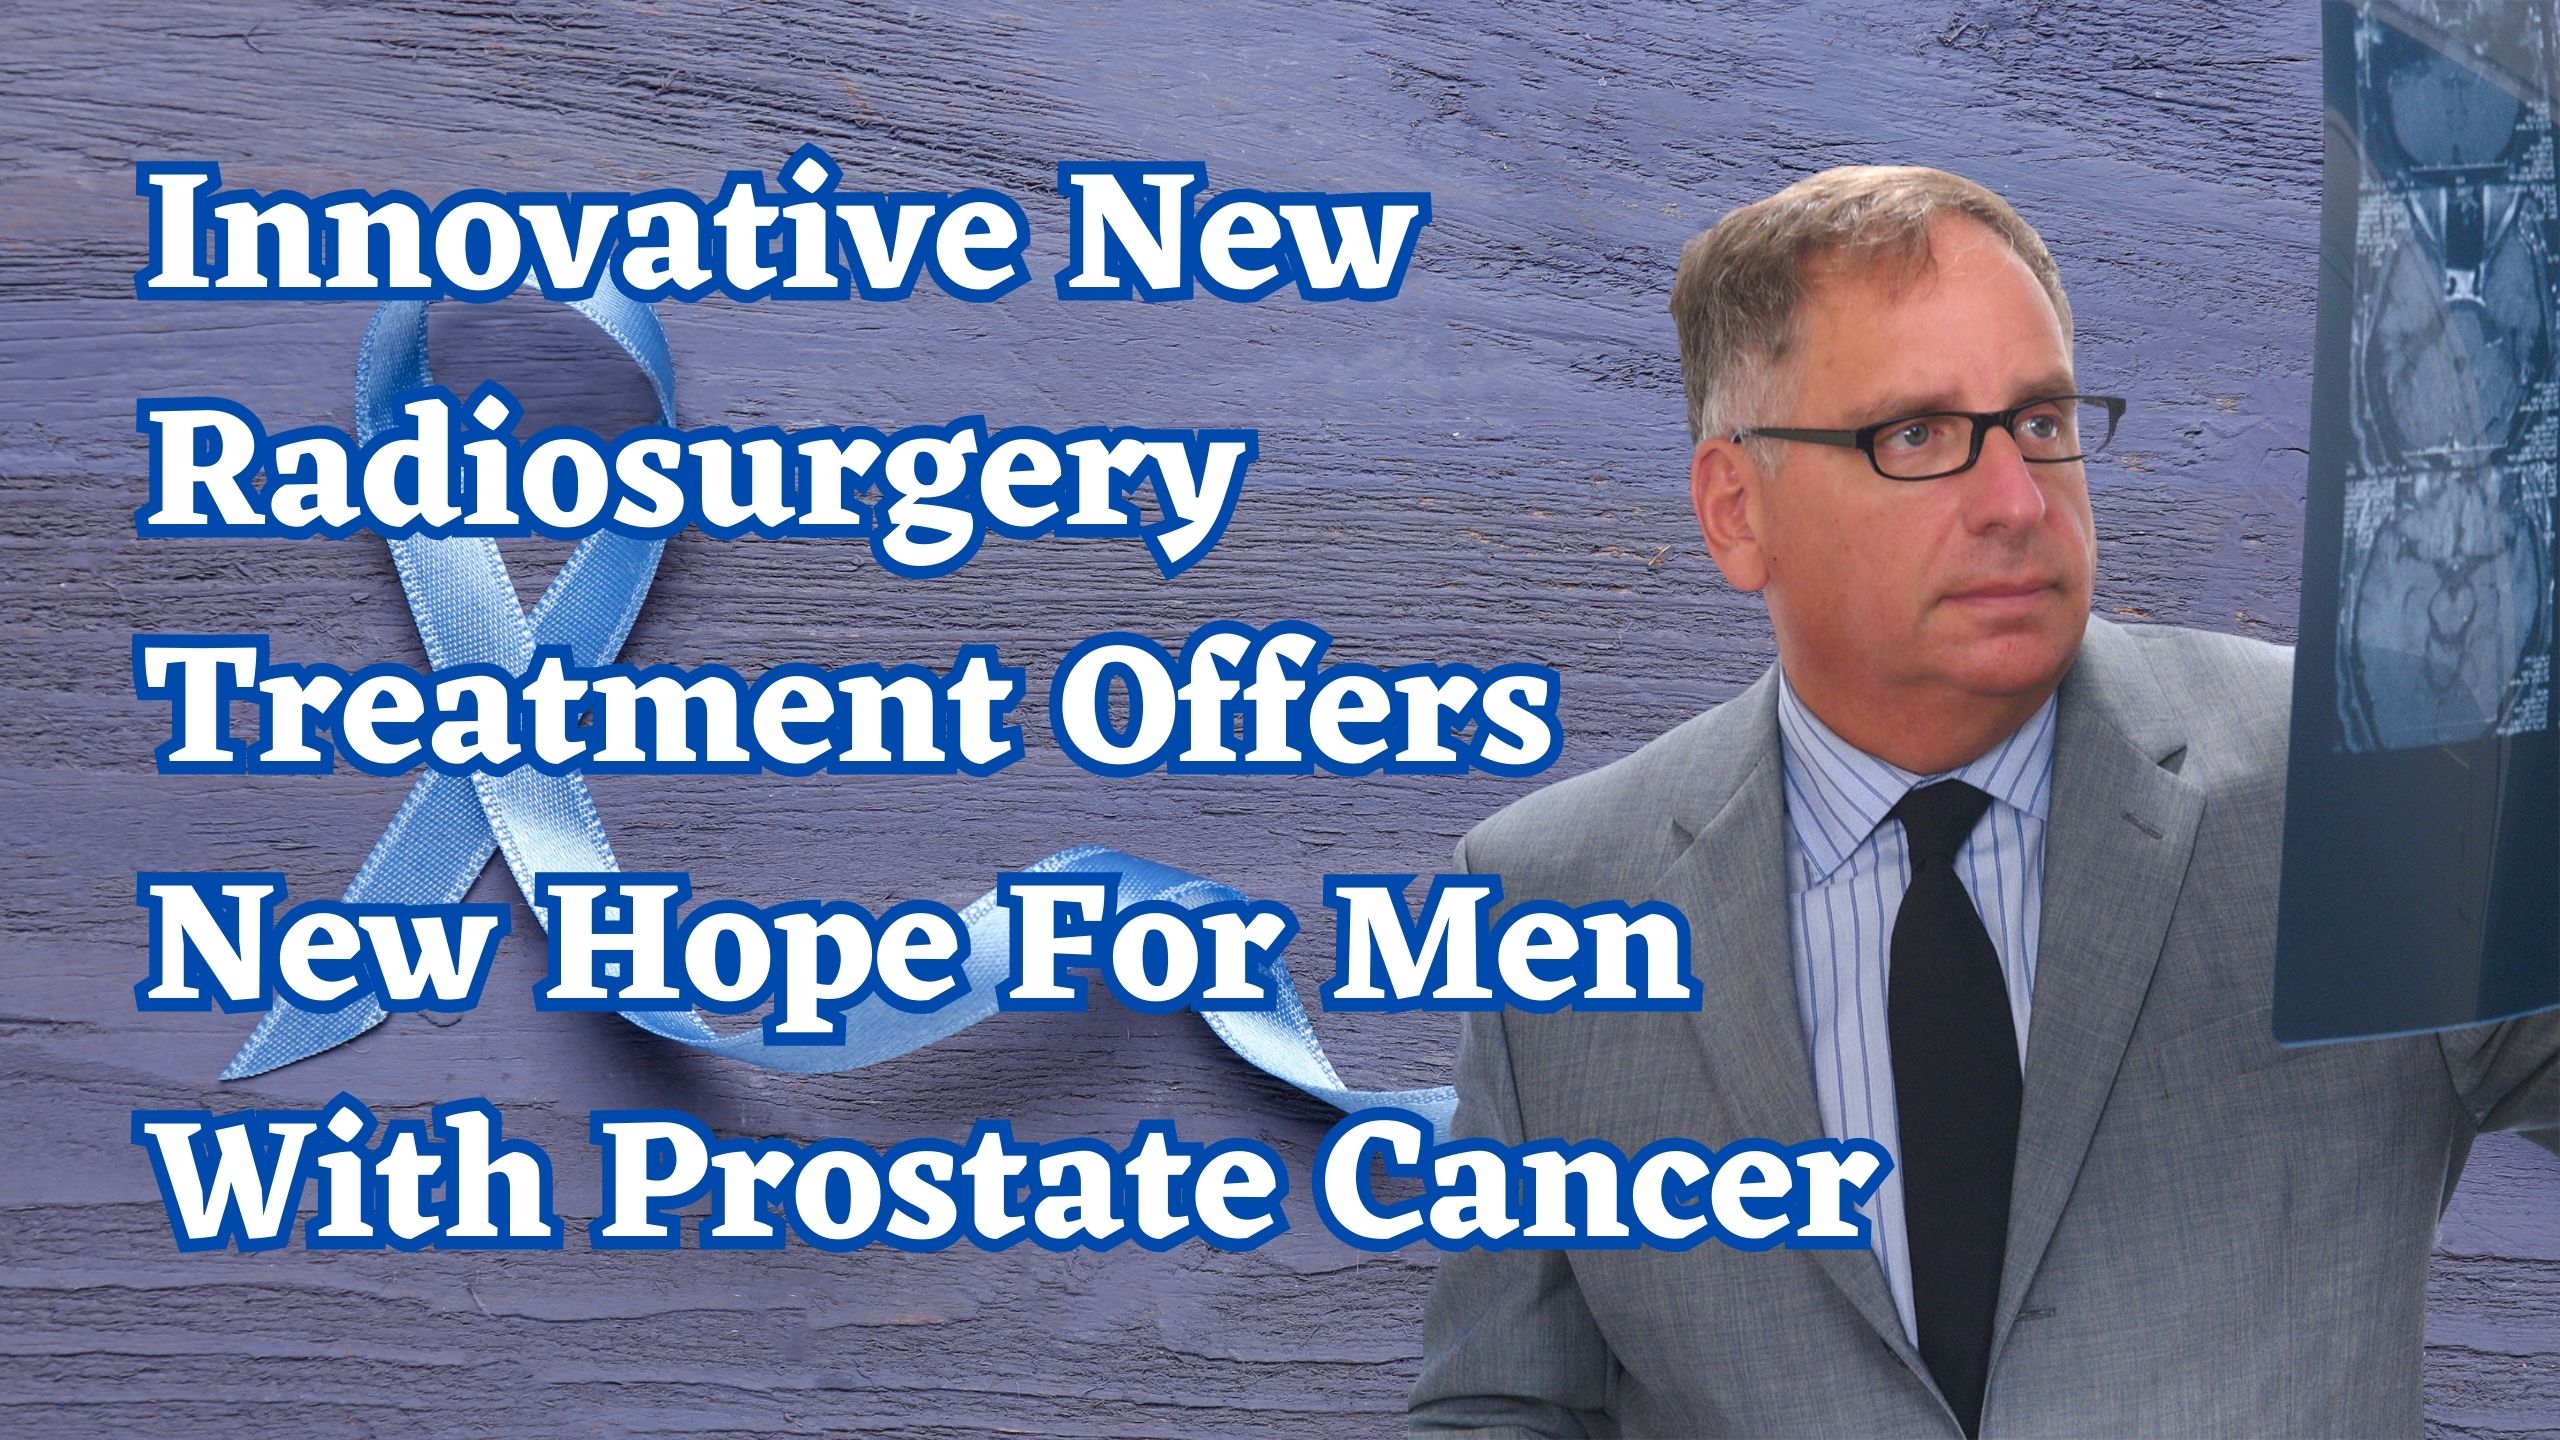 Innovative New Radiosurgery Treatment Offers New Hope For Men With Prostate Cancer